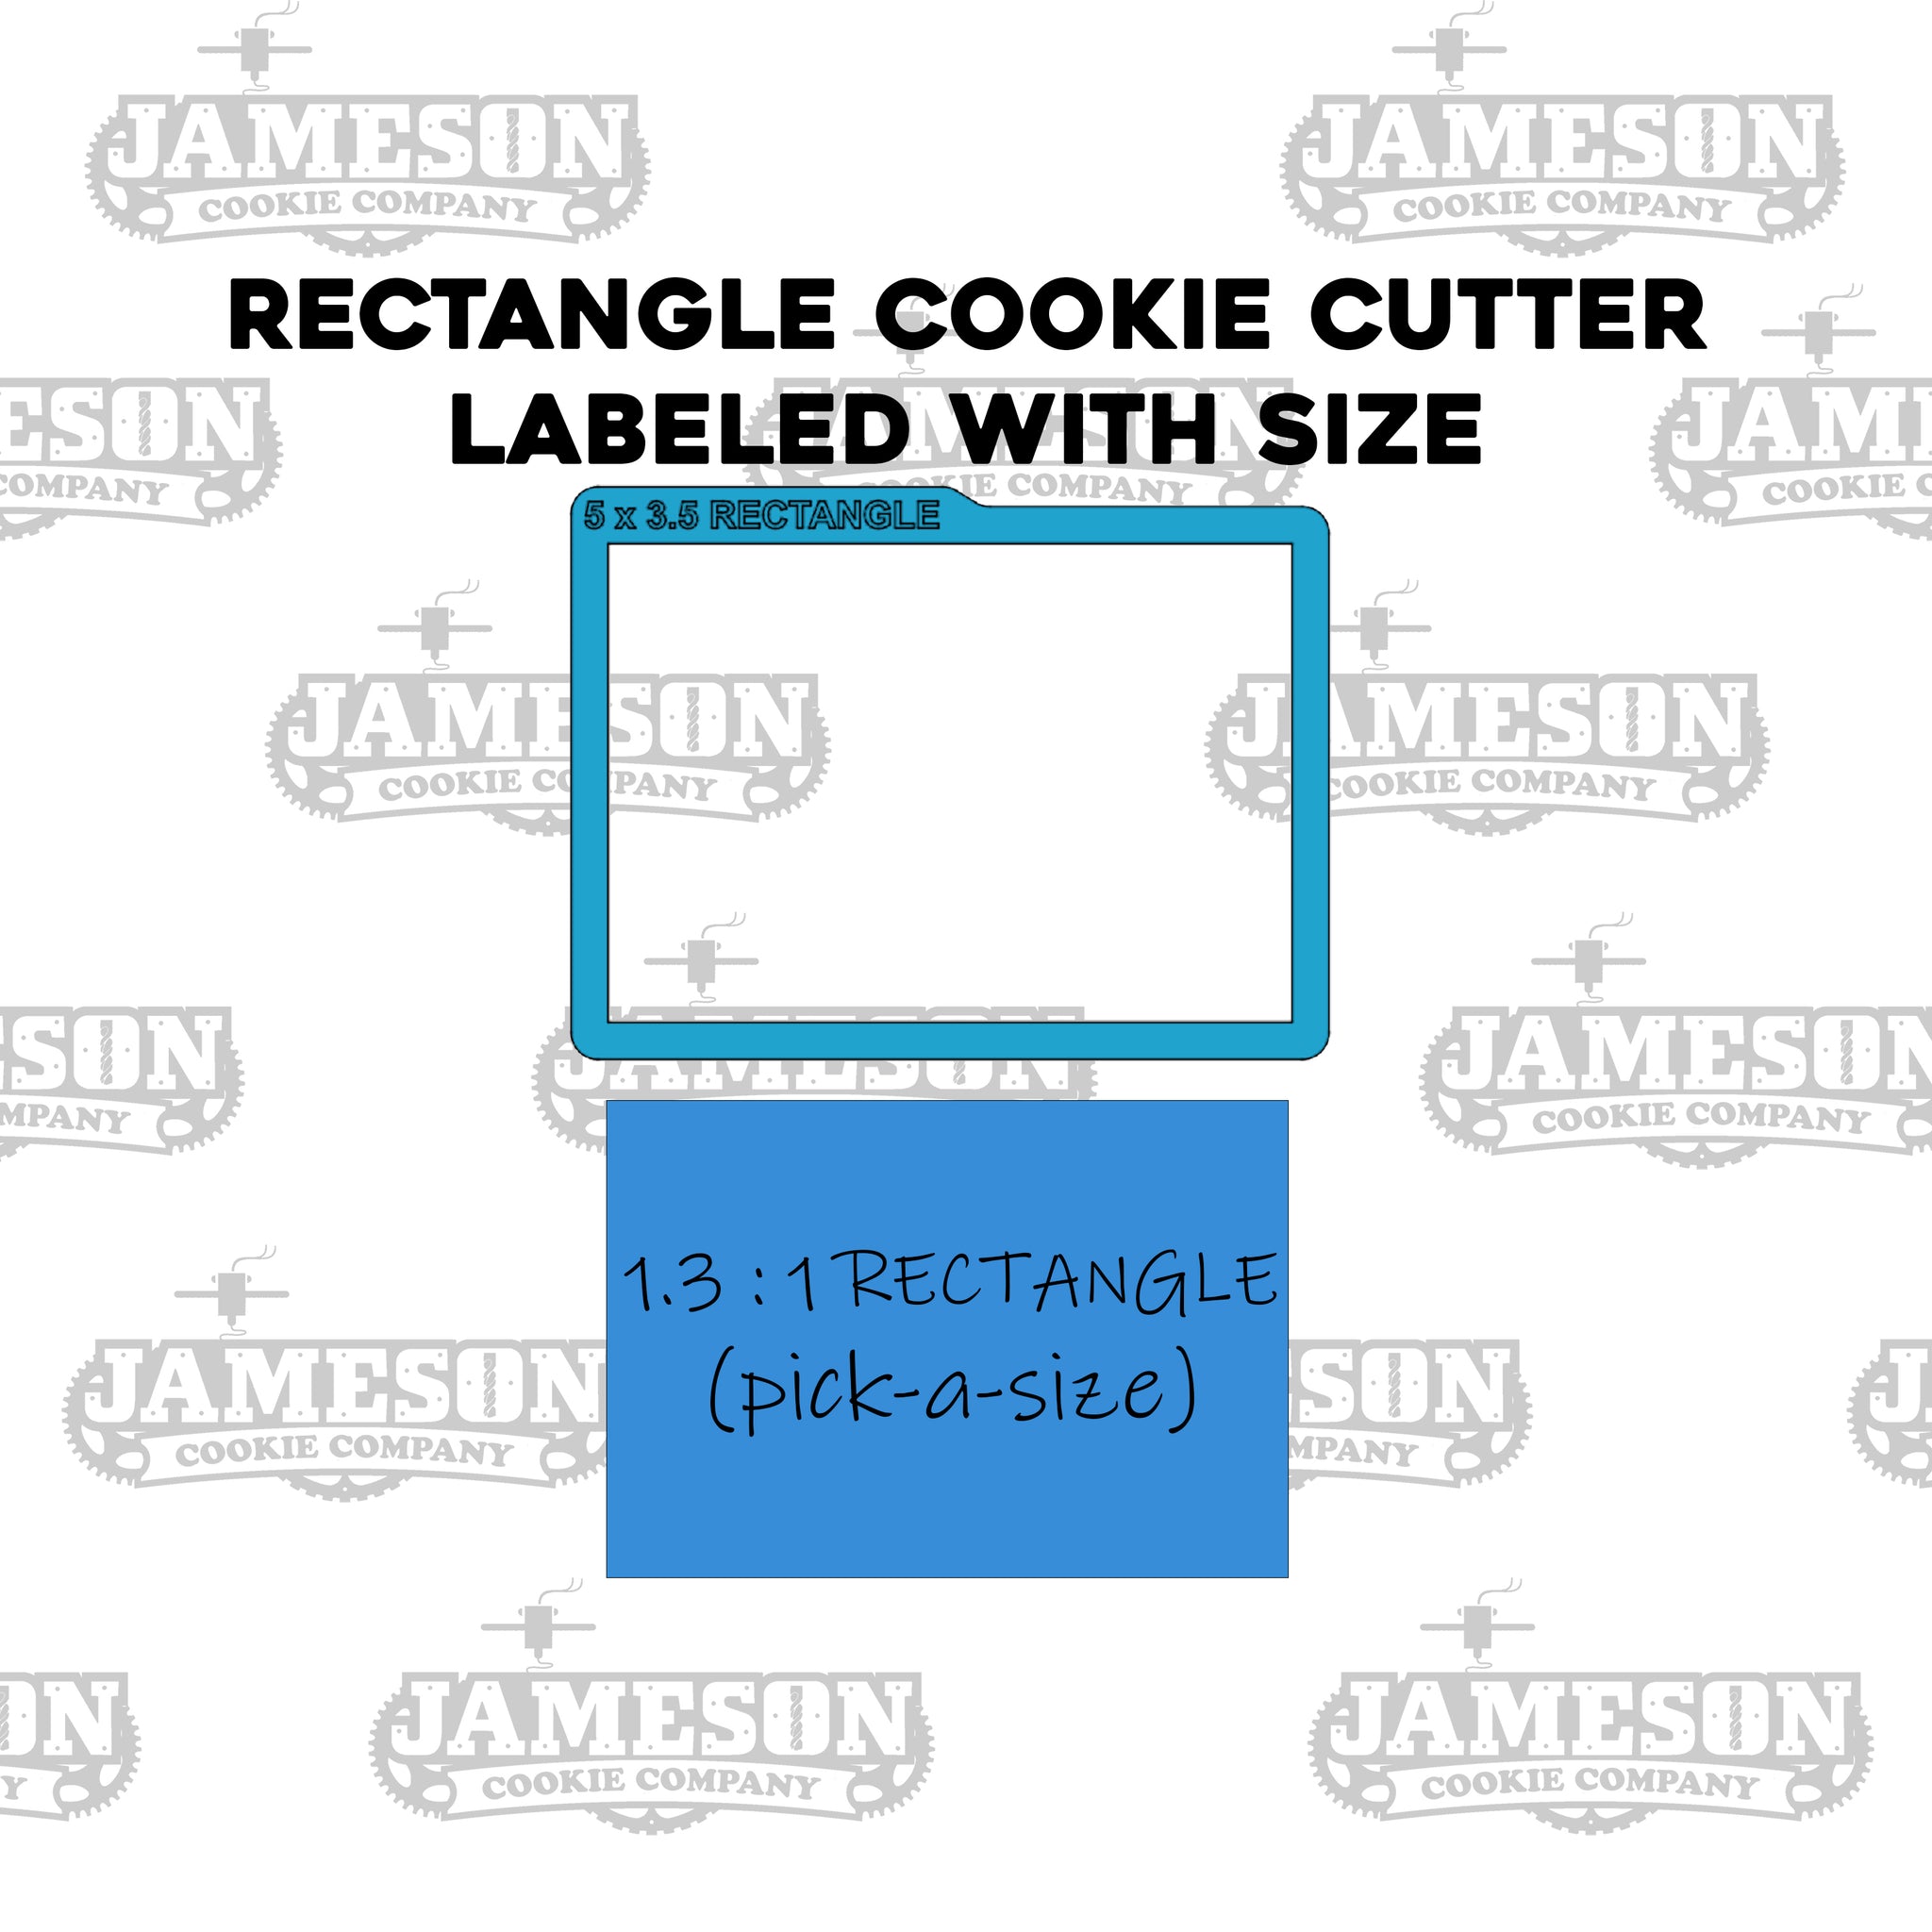 1.33 to 1 Ratio - Rectangle Shaped Cookie Cutter